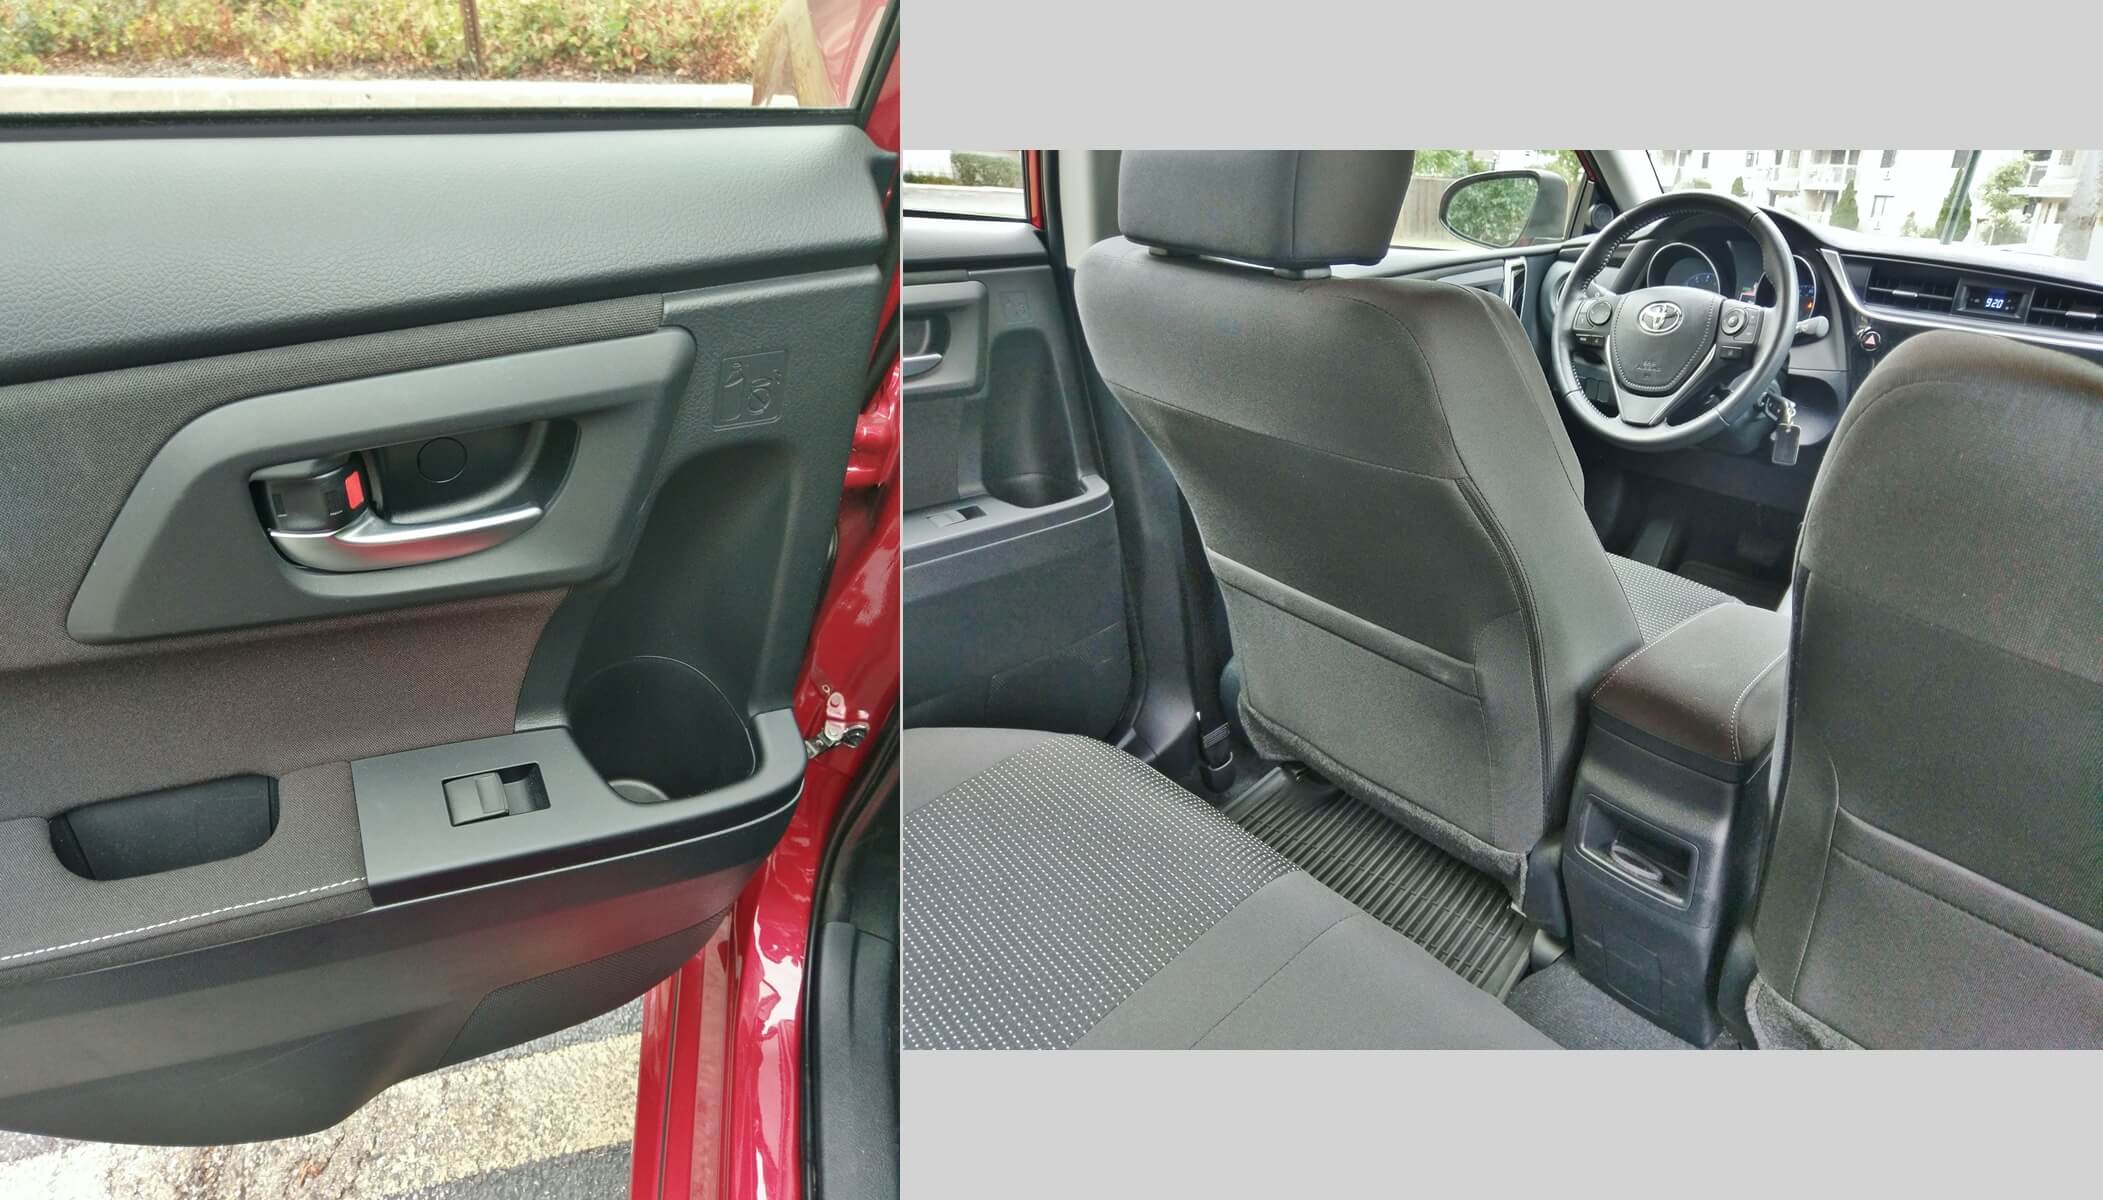 2018 Corolla iM: Rear seat entry & storage, including dual front seat rear pockets and front center console rear shelf